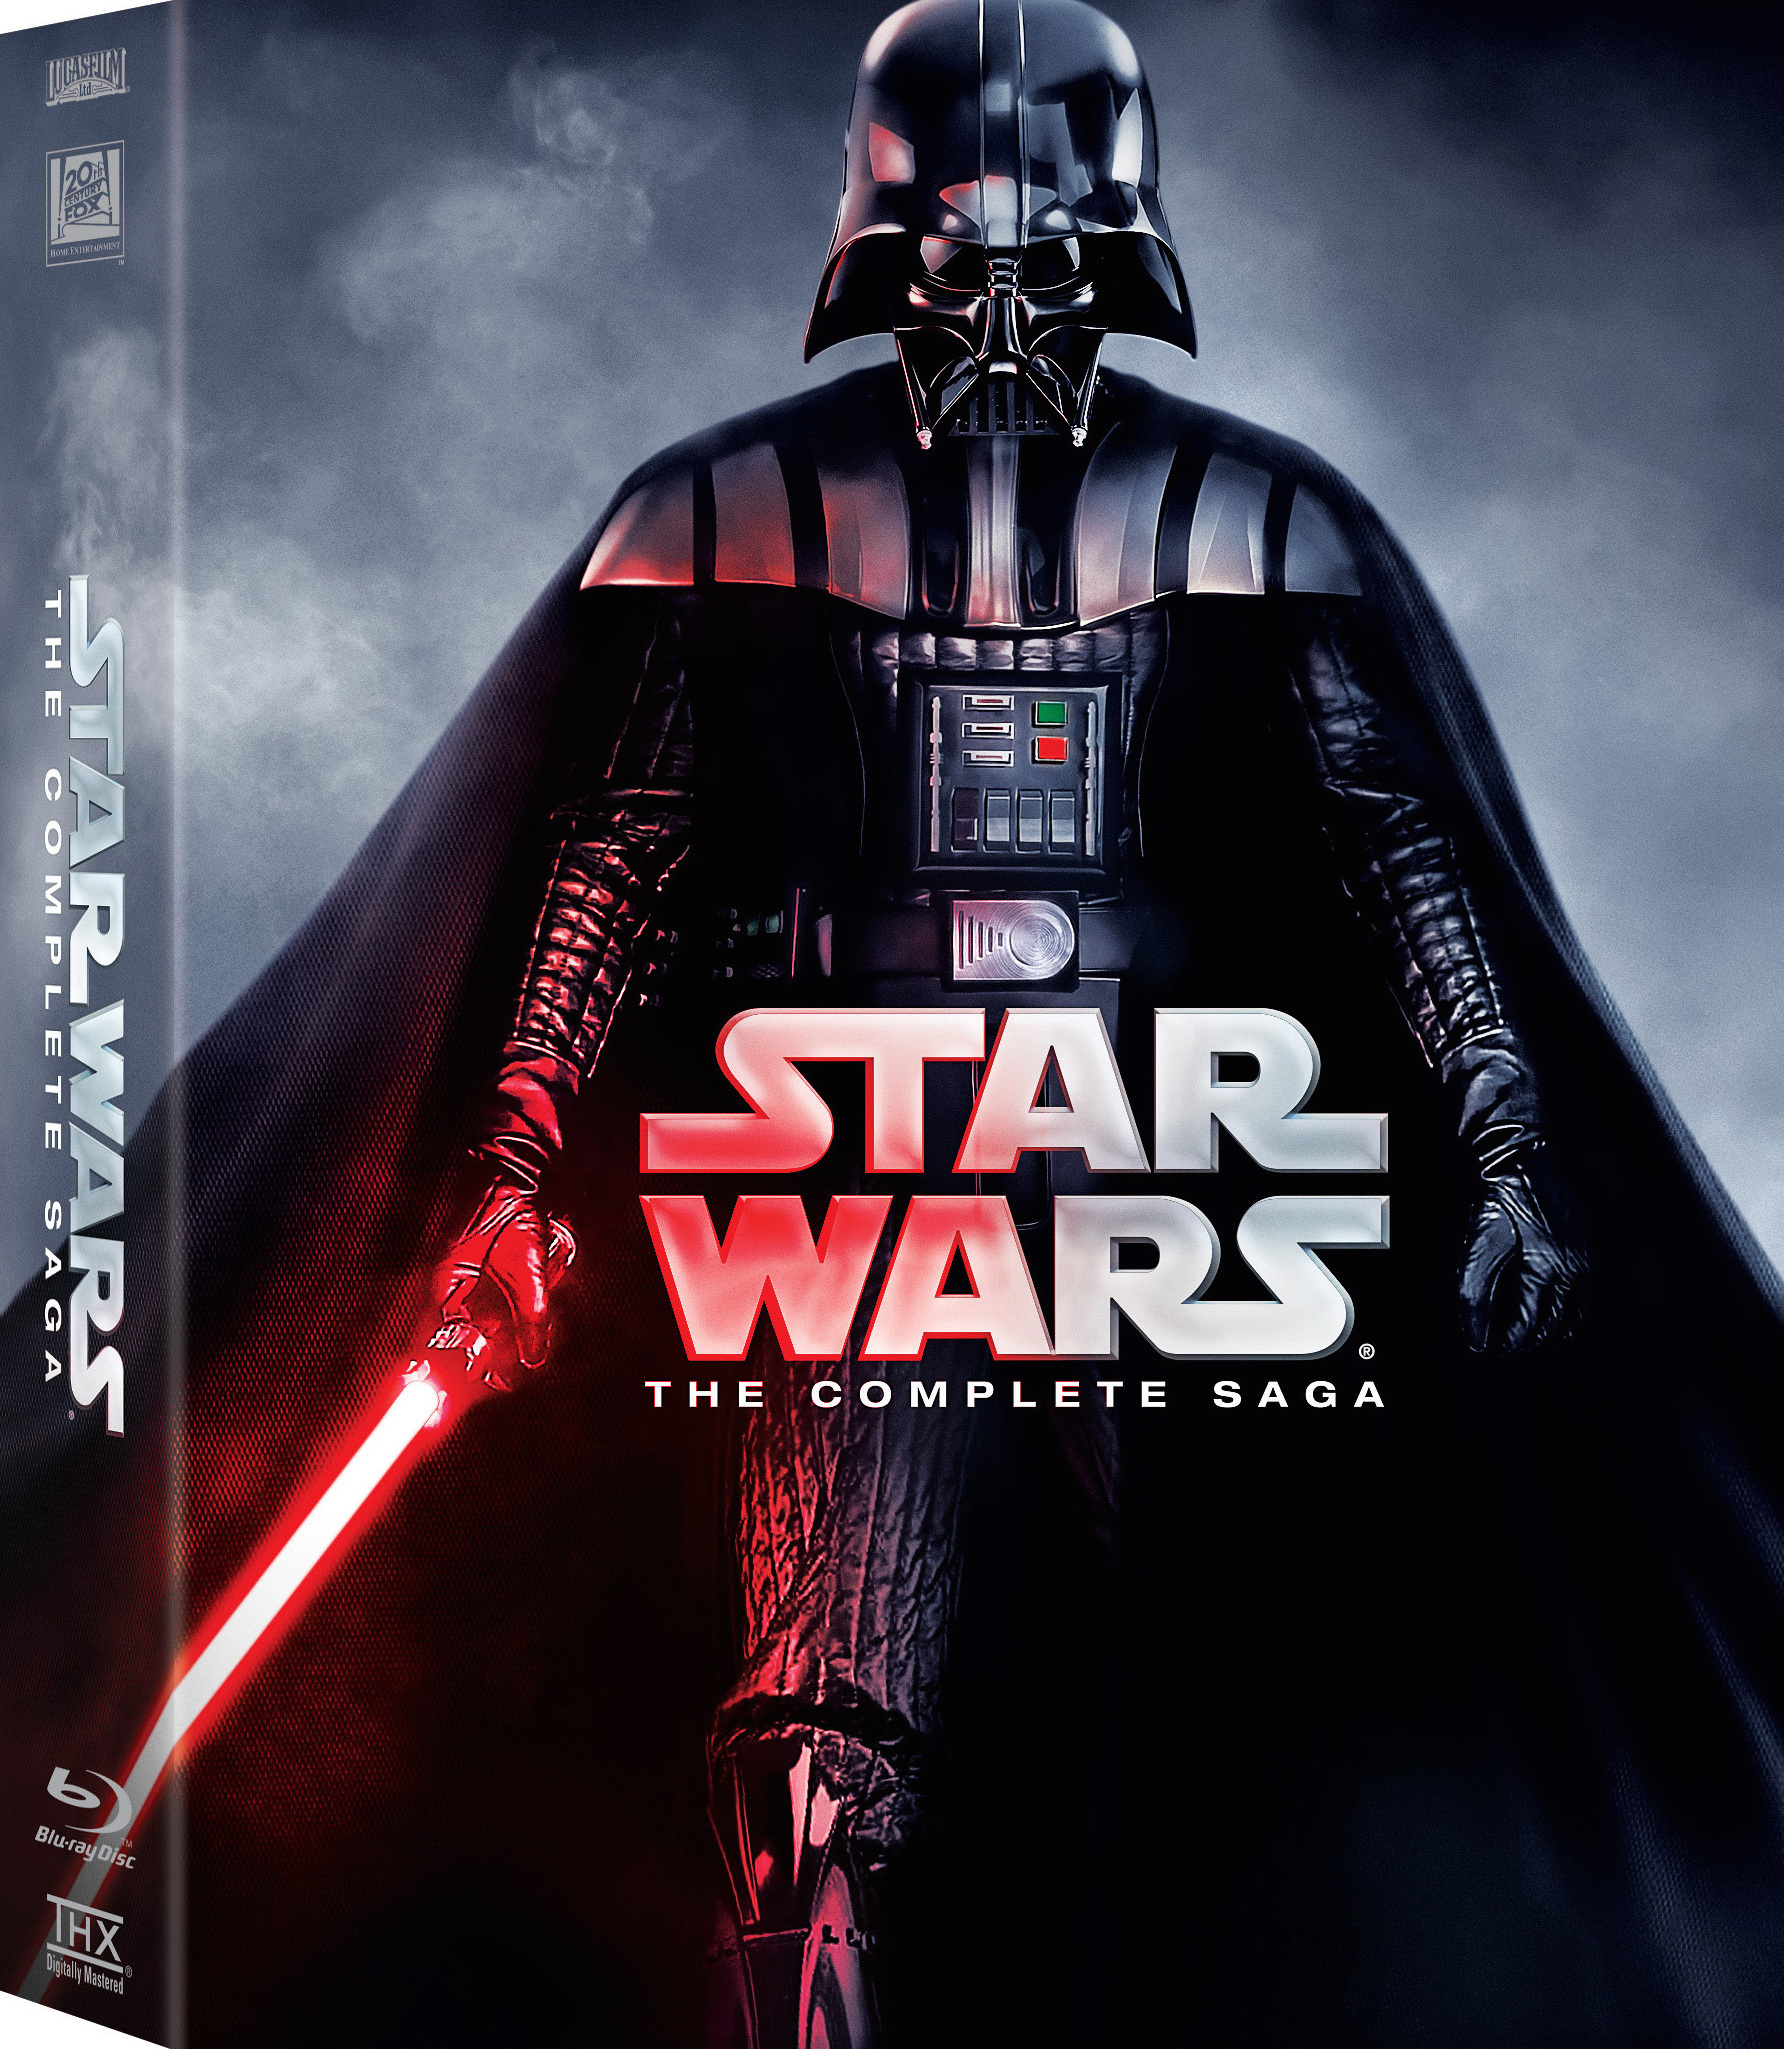 Star Wars: The Complete Saga [Episodes I-VIII] (1977-2017) Star Wars: La Saga Completa [Episodios I-VIII] (1977-2017) [AC3 5.1 + SUP] [Blu Ray-Rip] 137947_front